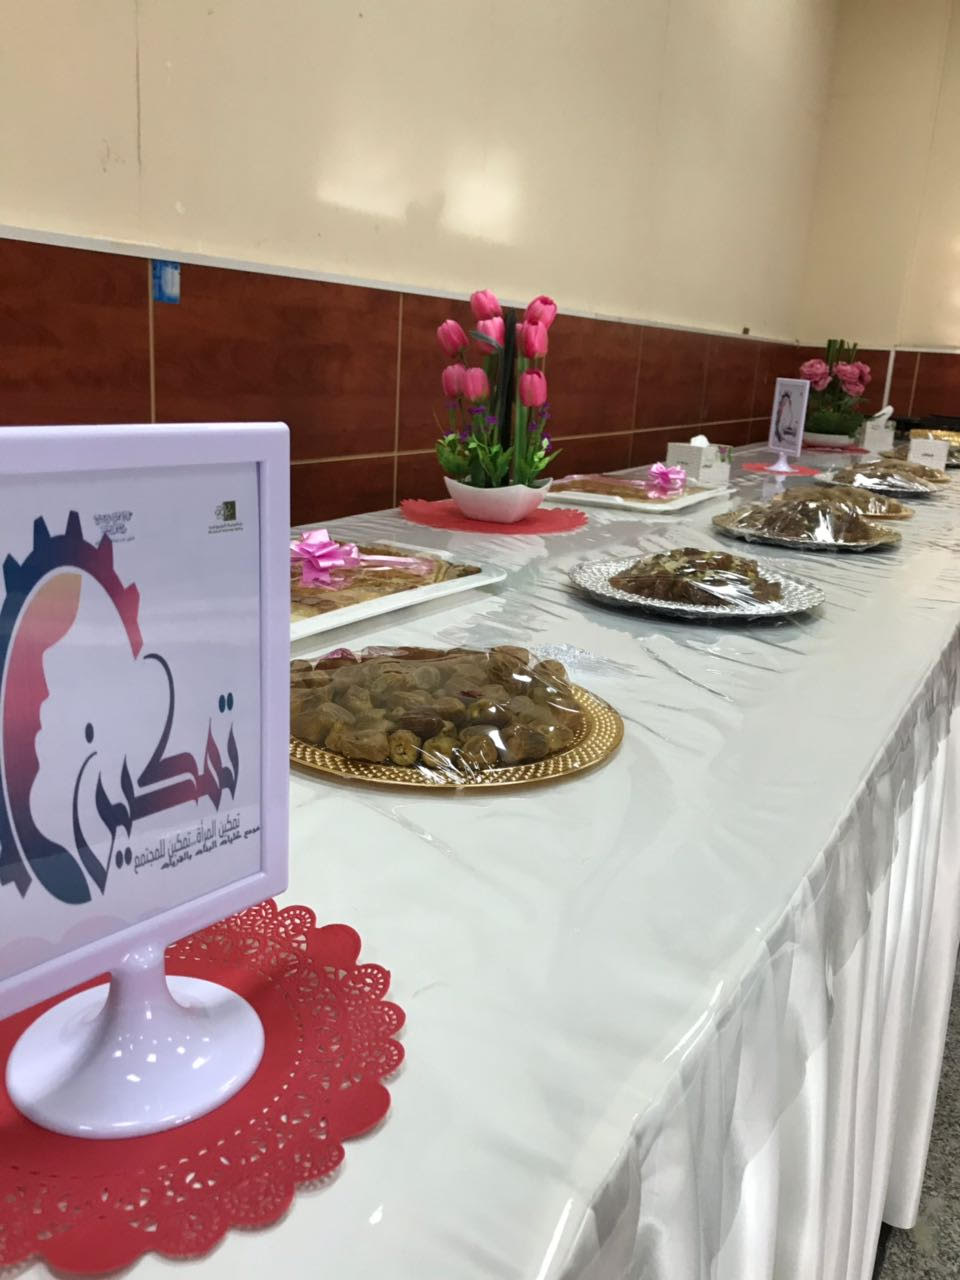 The activities of the first day are an empowerment initiative at the Girls’ College Complex in Qurayyat